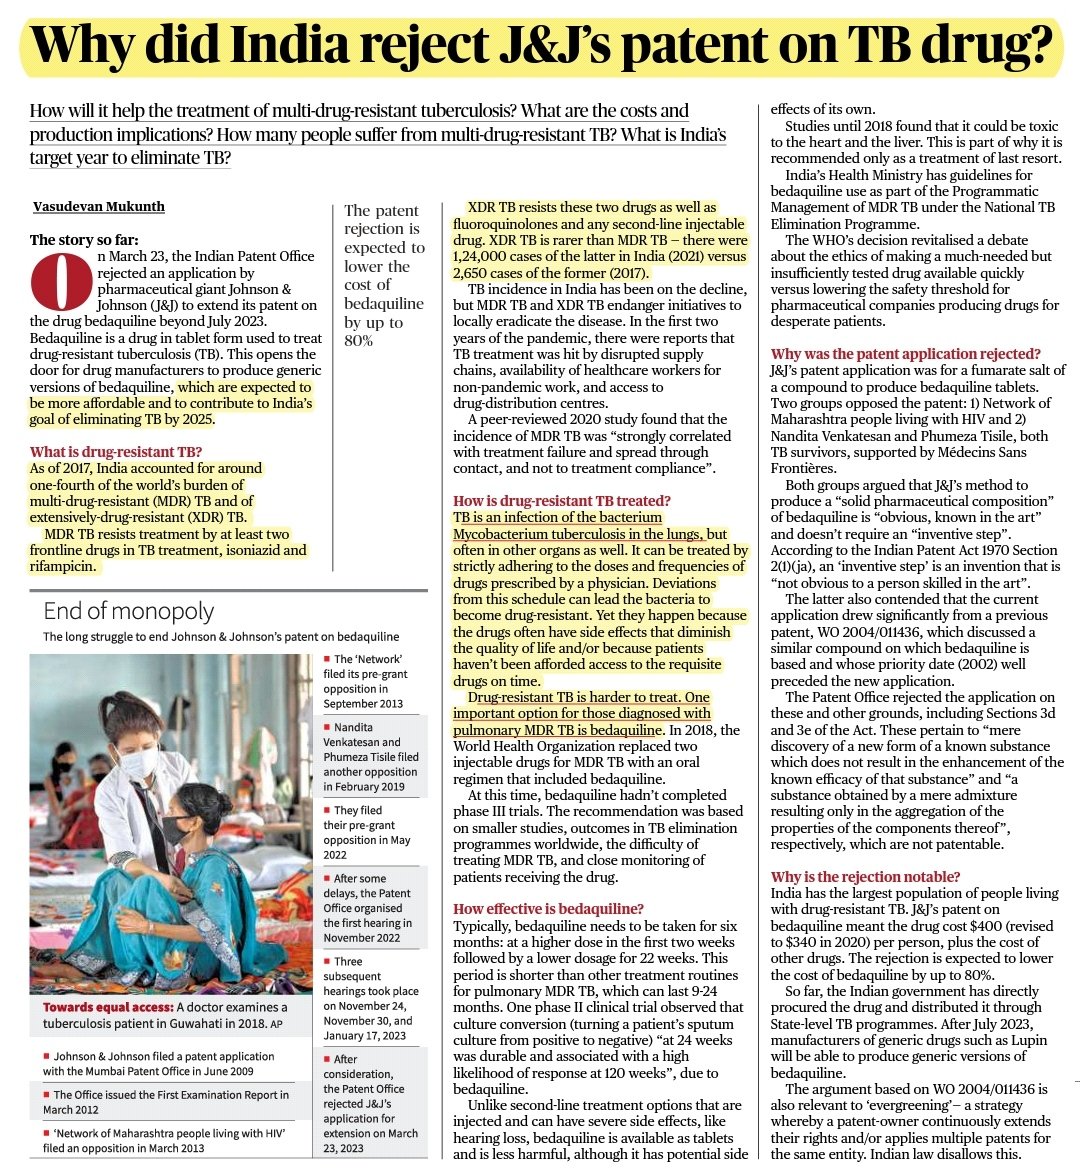 Tuberculosis: Multidrug-resistant tuberculosis (MDR-TB)

Source: The Hindu 

GS Paper 2: Health, Scientific innovation and Discoveries 

#UPSC2023 #TBDay23 #tuberculosis